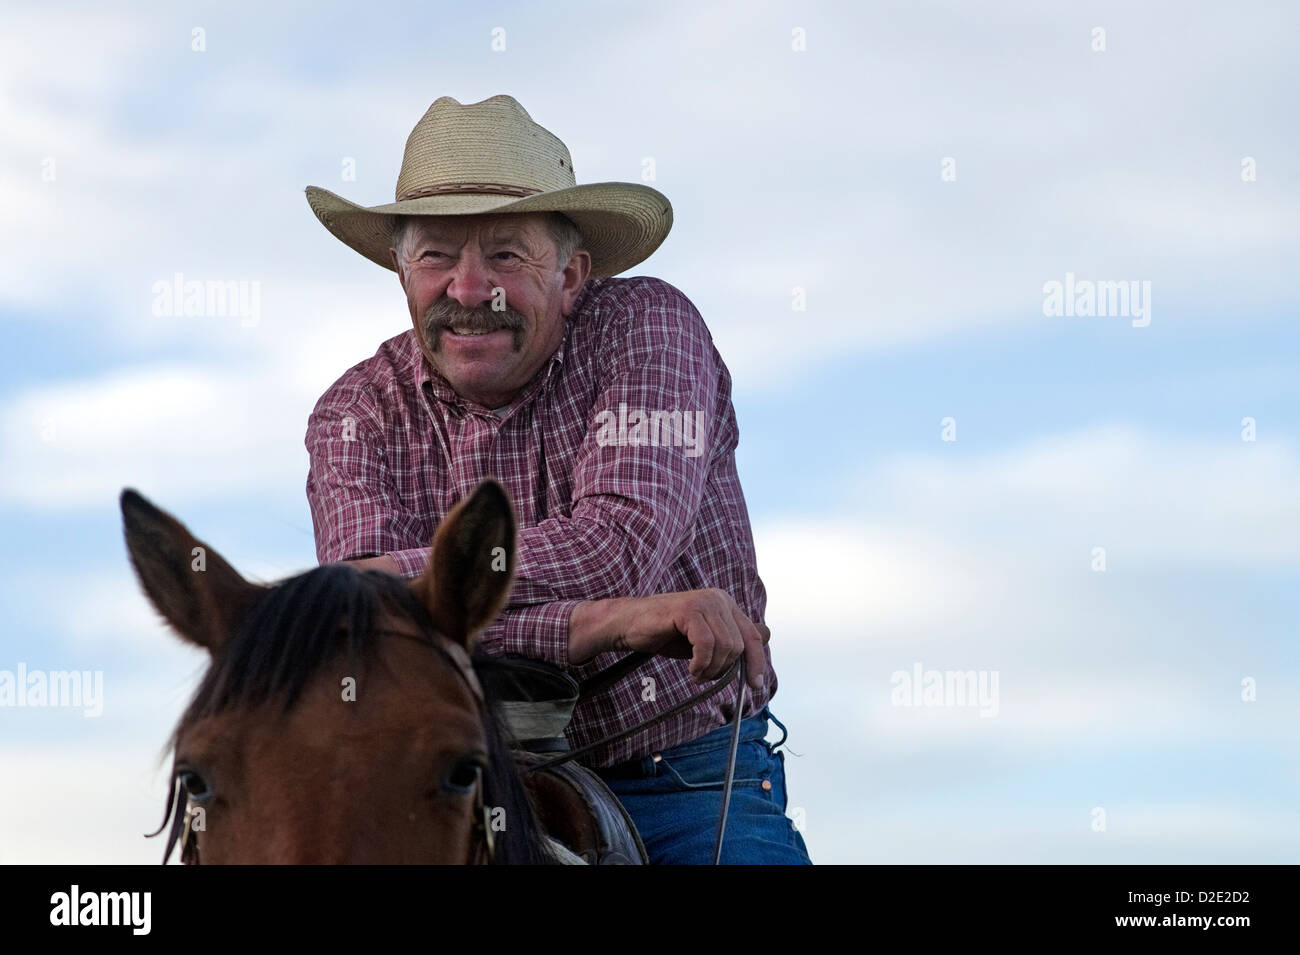 A cowboy sits on his horse at the Dalton Ranch in the Clover Valley, NV. Stock Photo